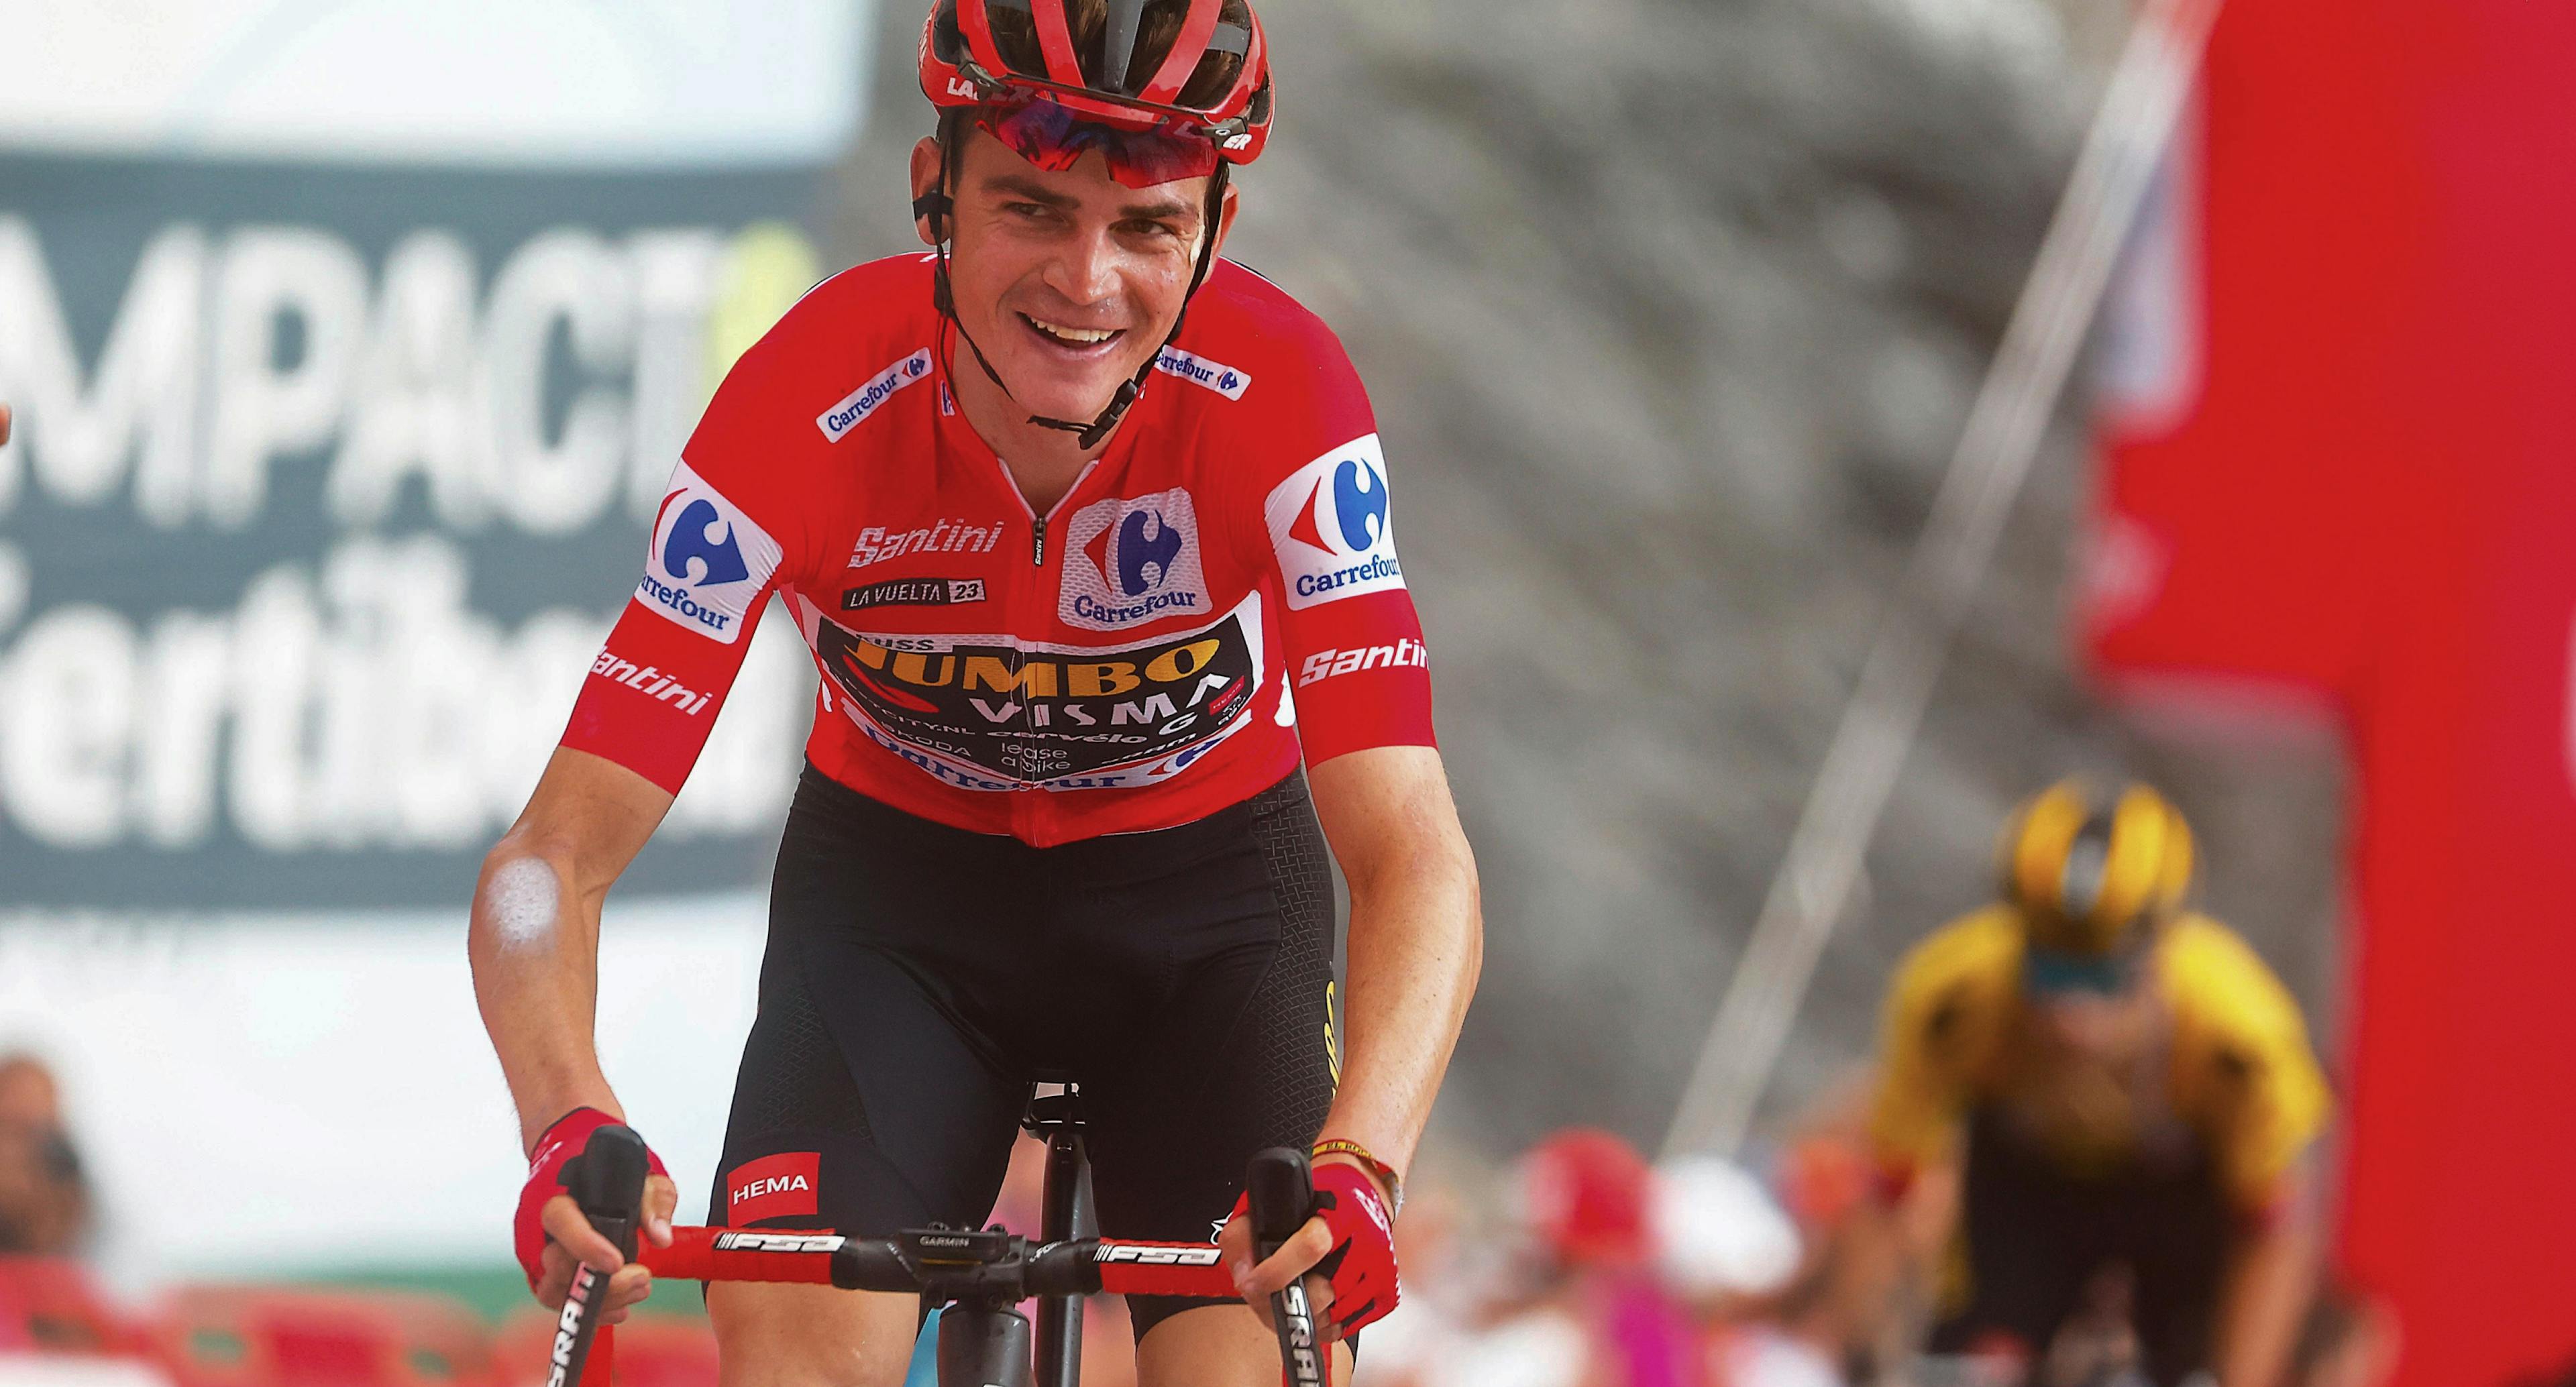 Sepp Kuss smiles while wearing the Red Jersey of the Vuelta a España.